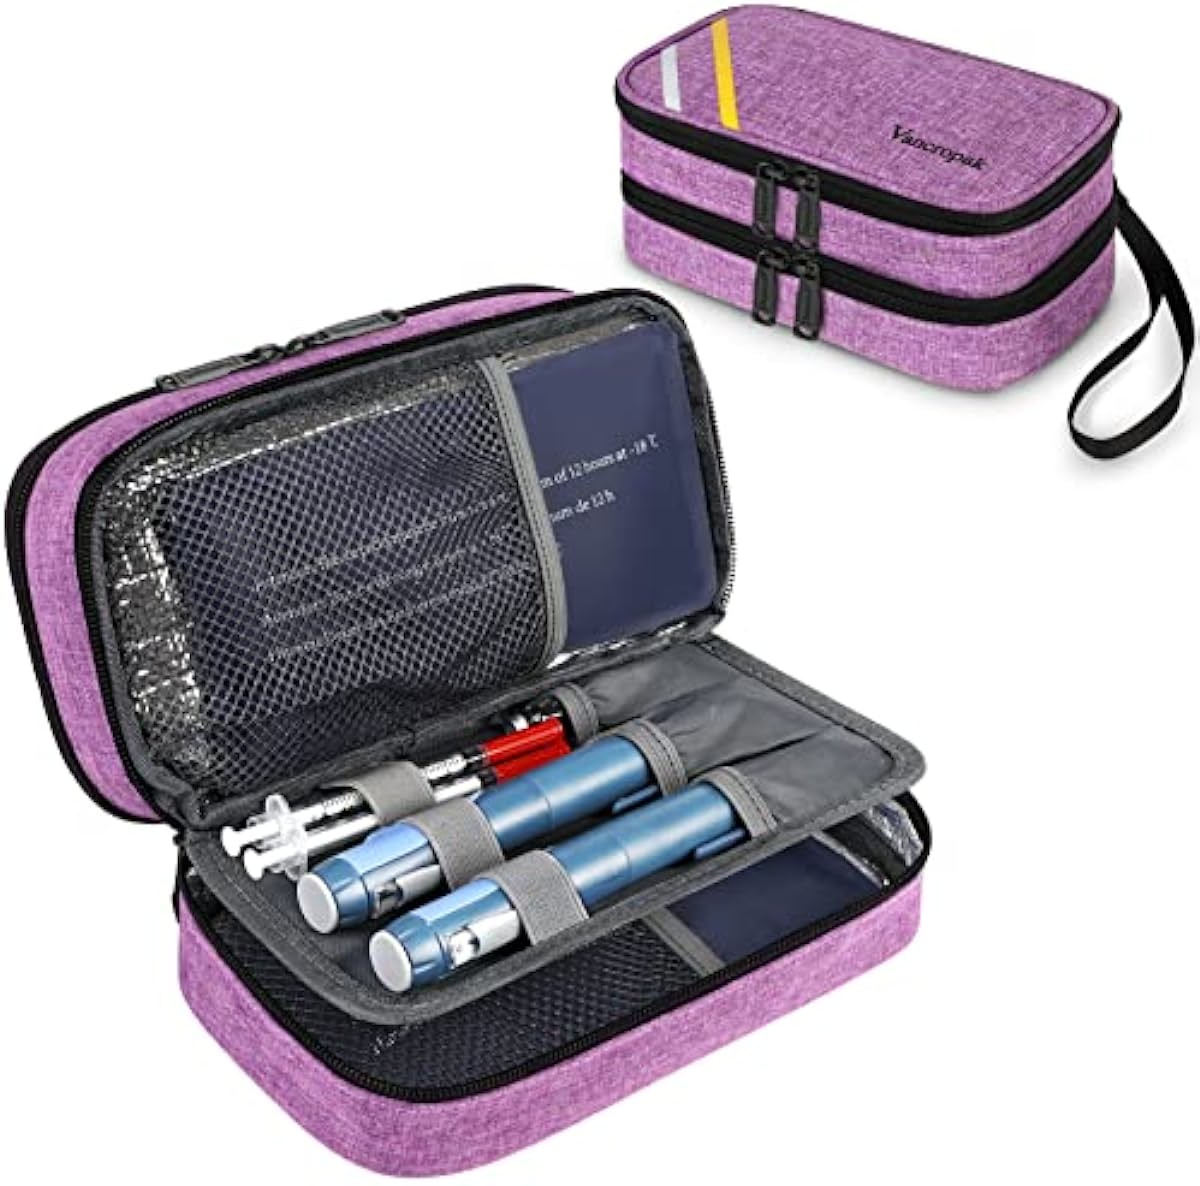 Diabetic Travel Case，Double Layer Insulin Cooler Travel Case for Women with 2 Ice Packs, Diabetic Supplies Pen Case with Medication Storage Pockets for Insulin Pens, Blood Glucose Meter, Purple